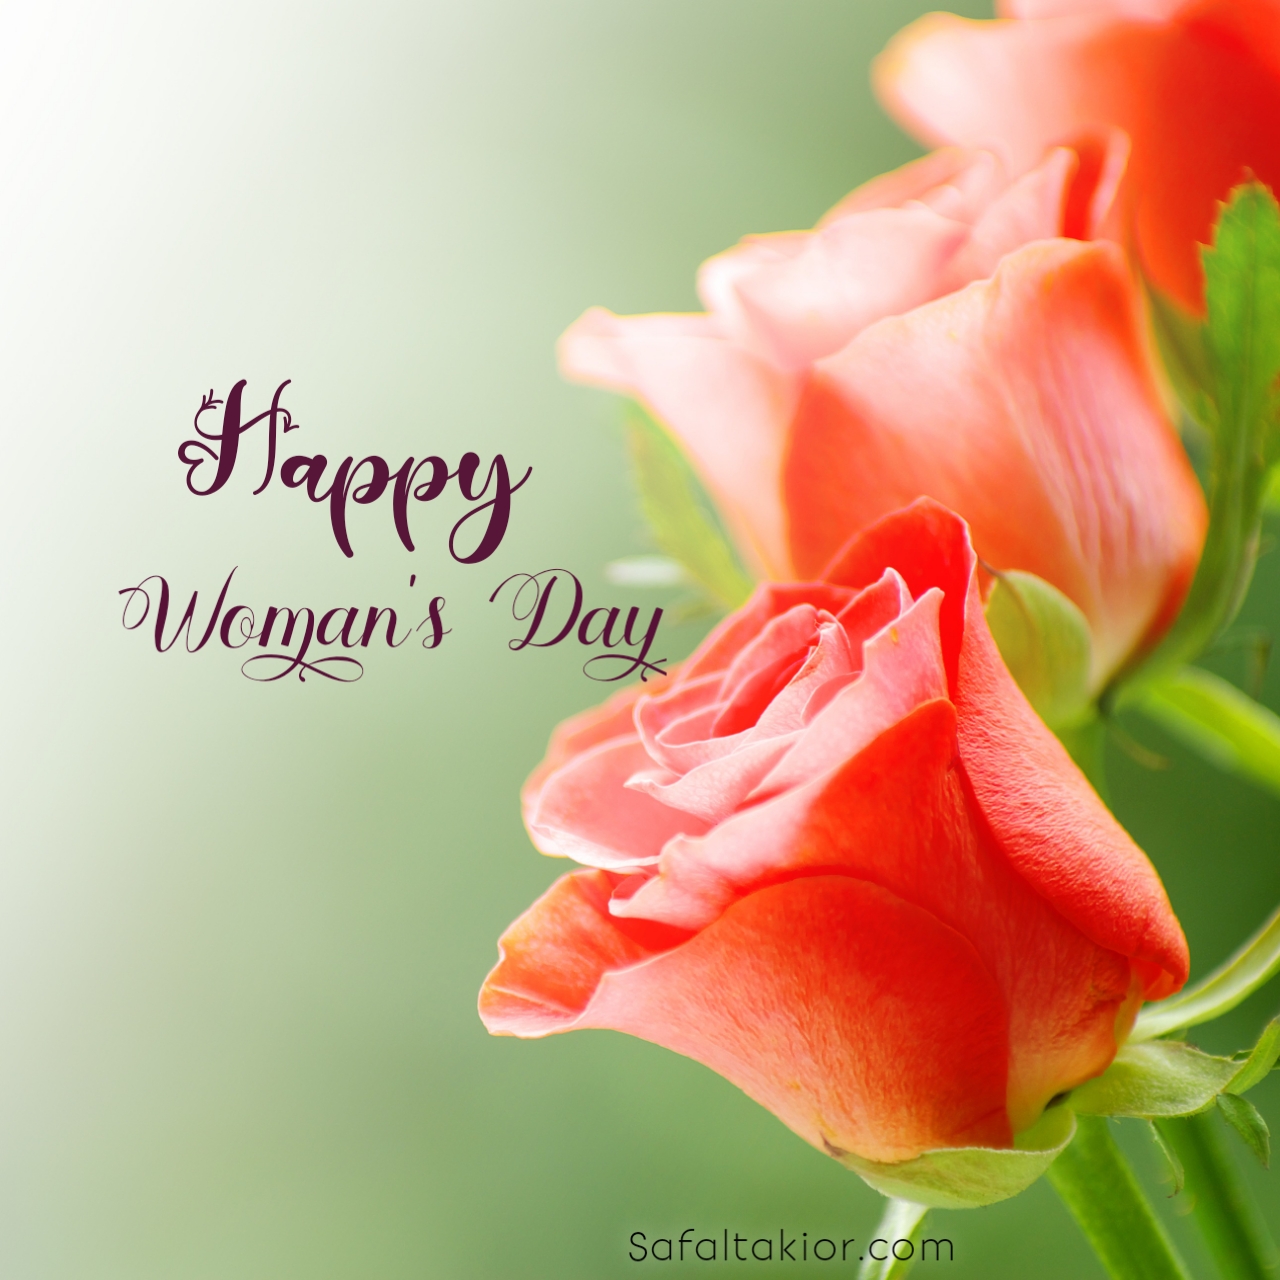 inspirational happy women's day images